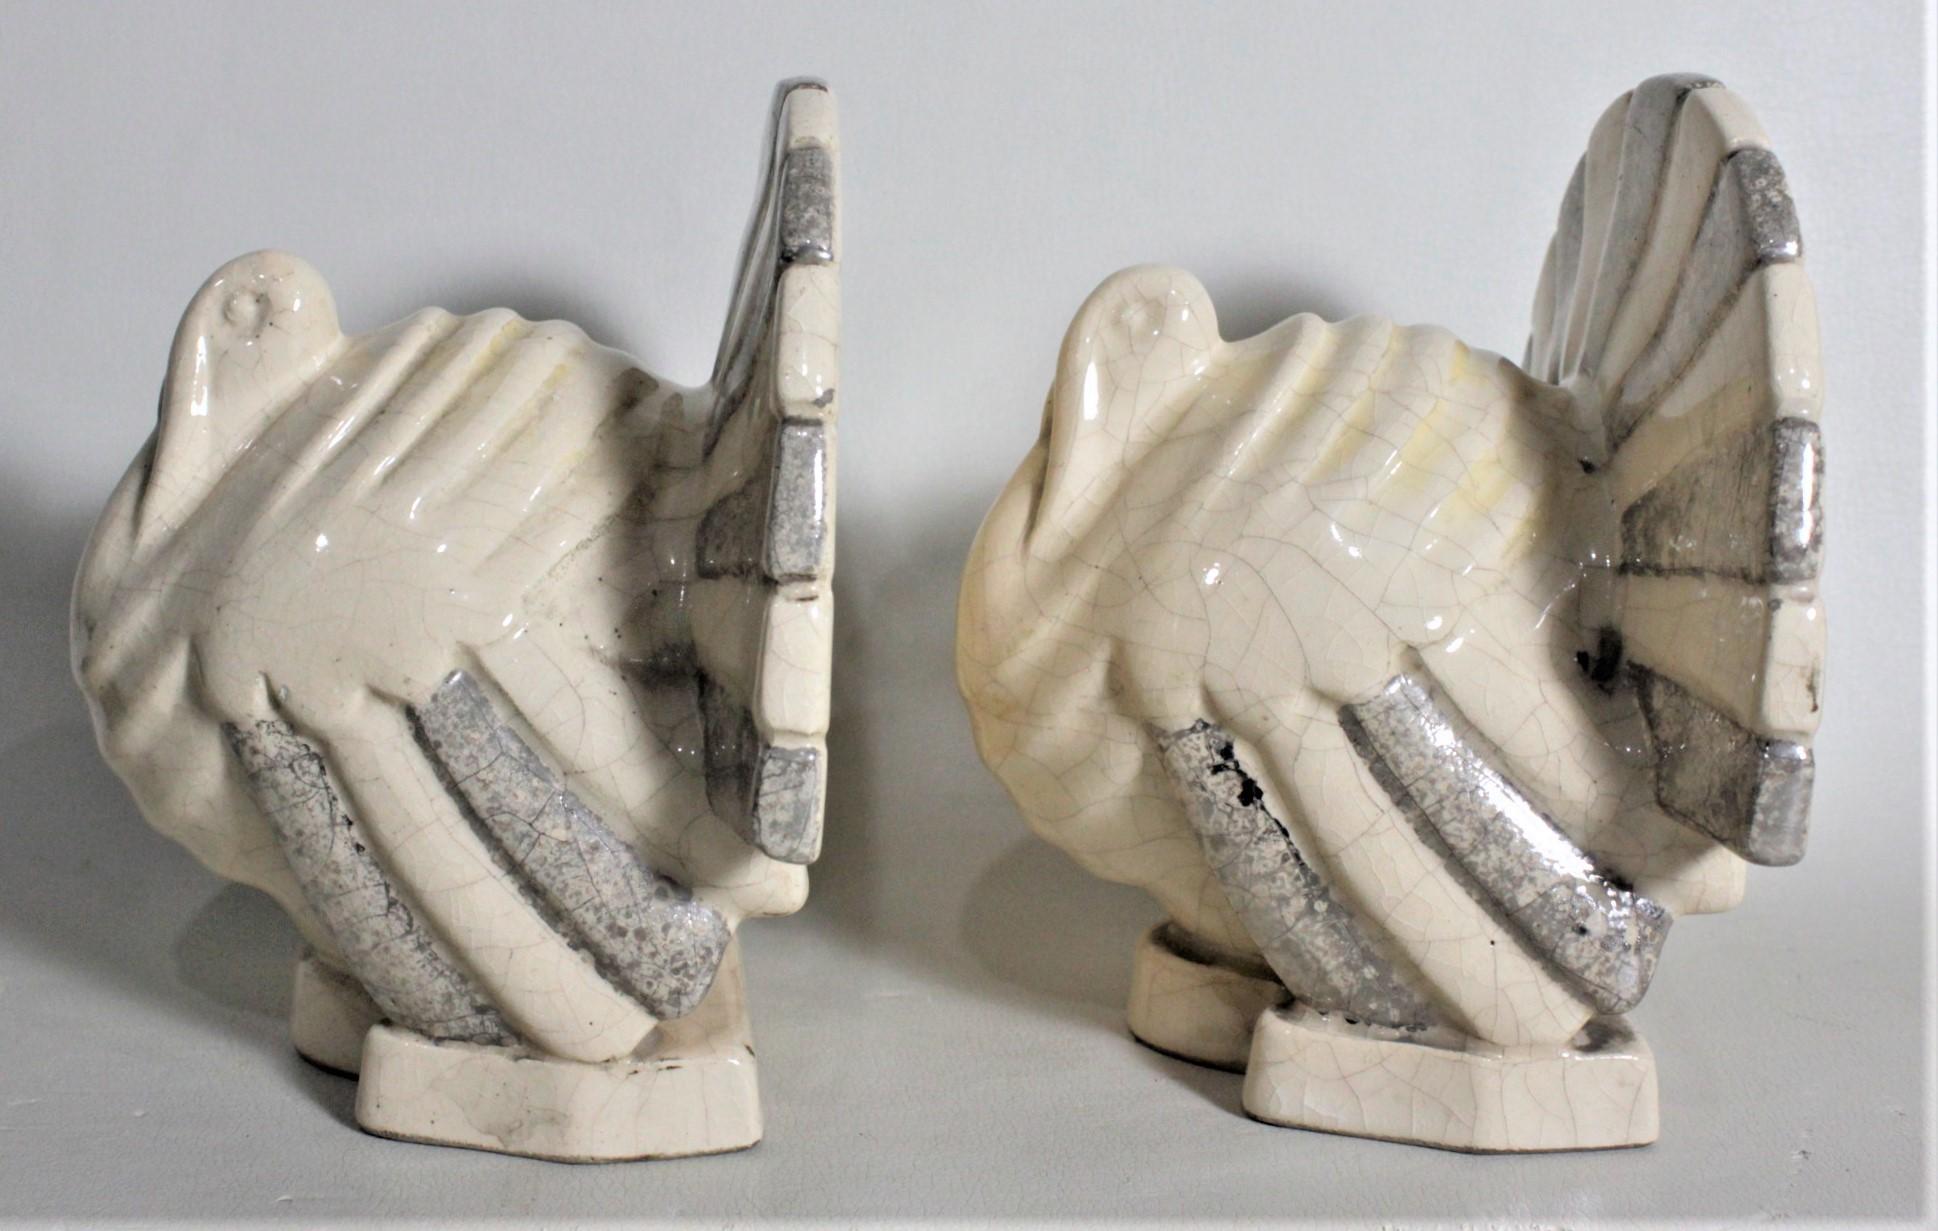 20th Century Art Deco Figural Ceramic Turkey Bookends in Taupe and Charcoal Grey Luster Glaze For Sale